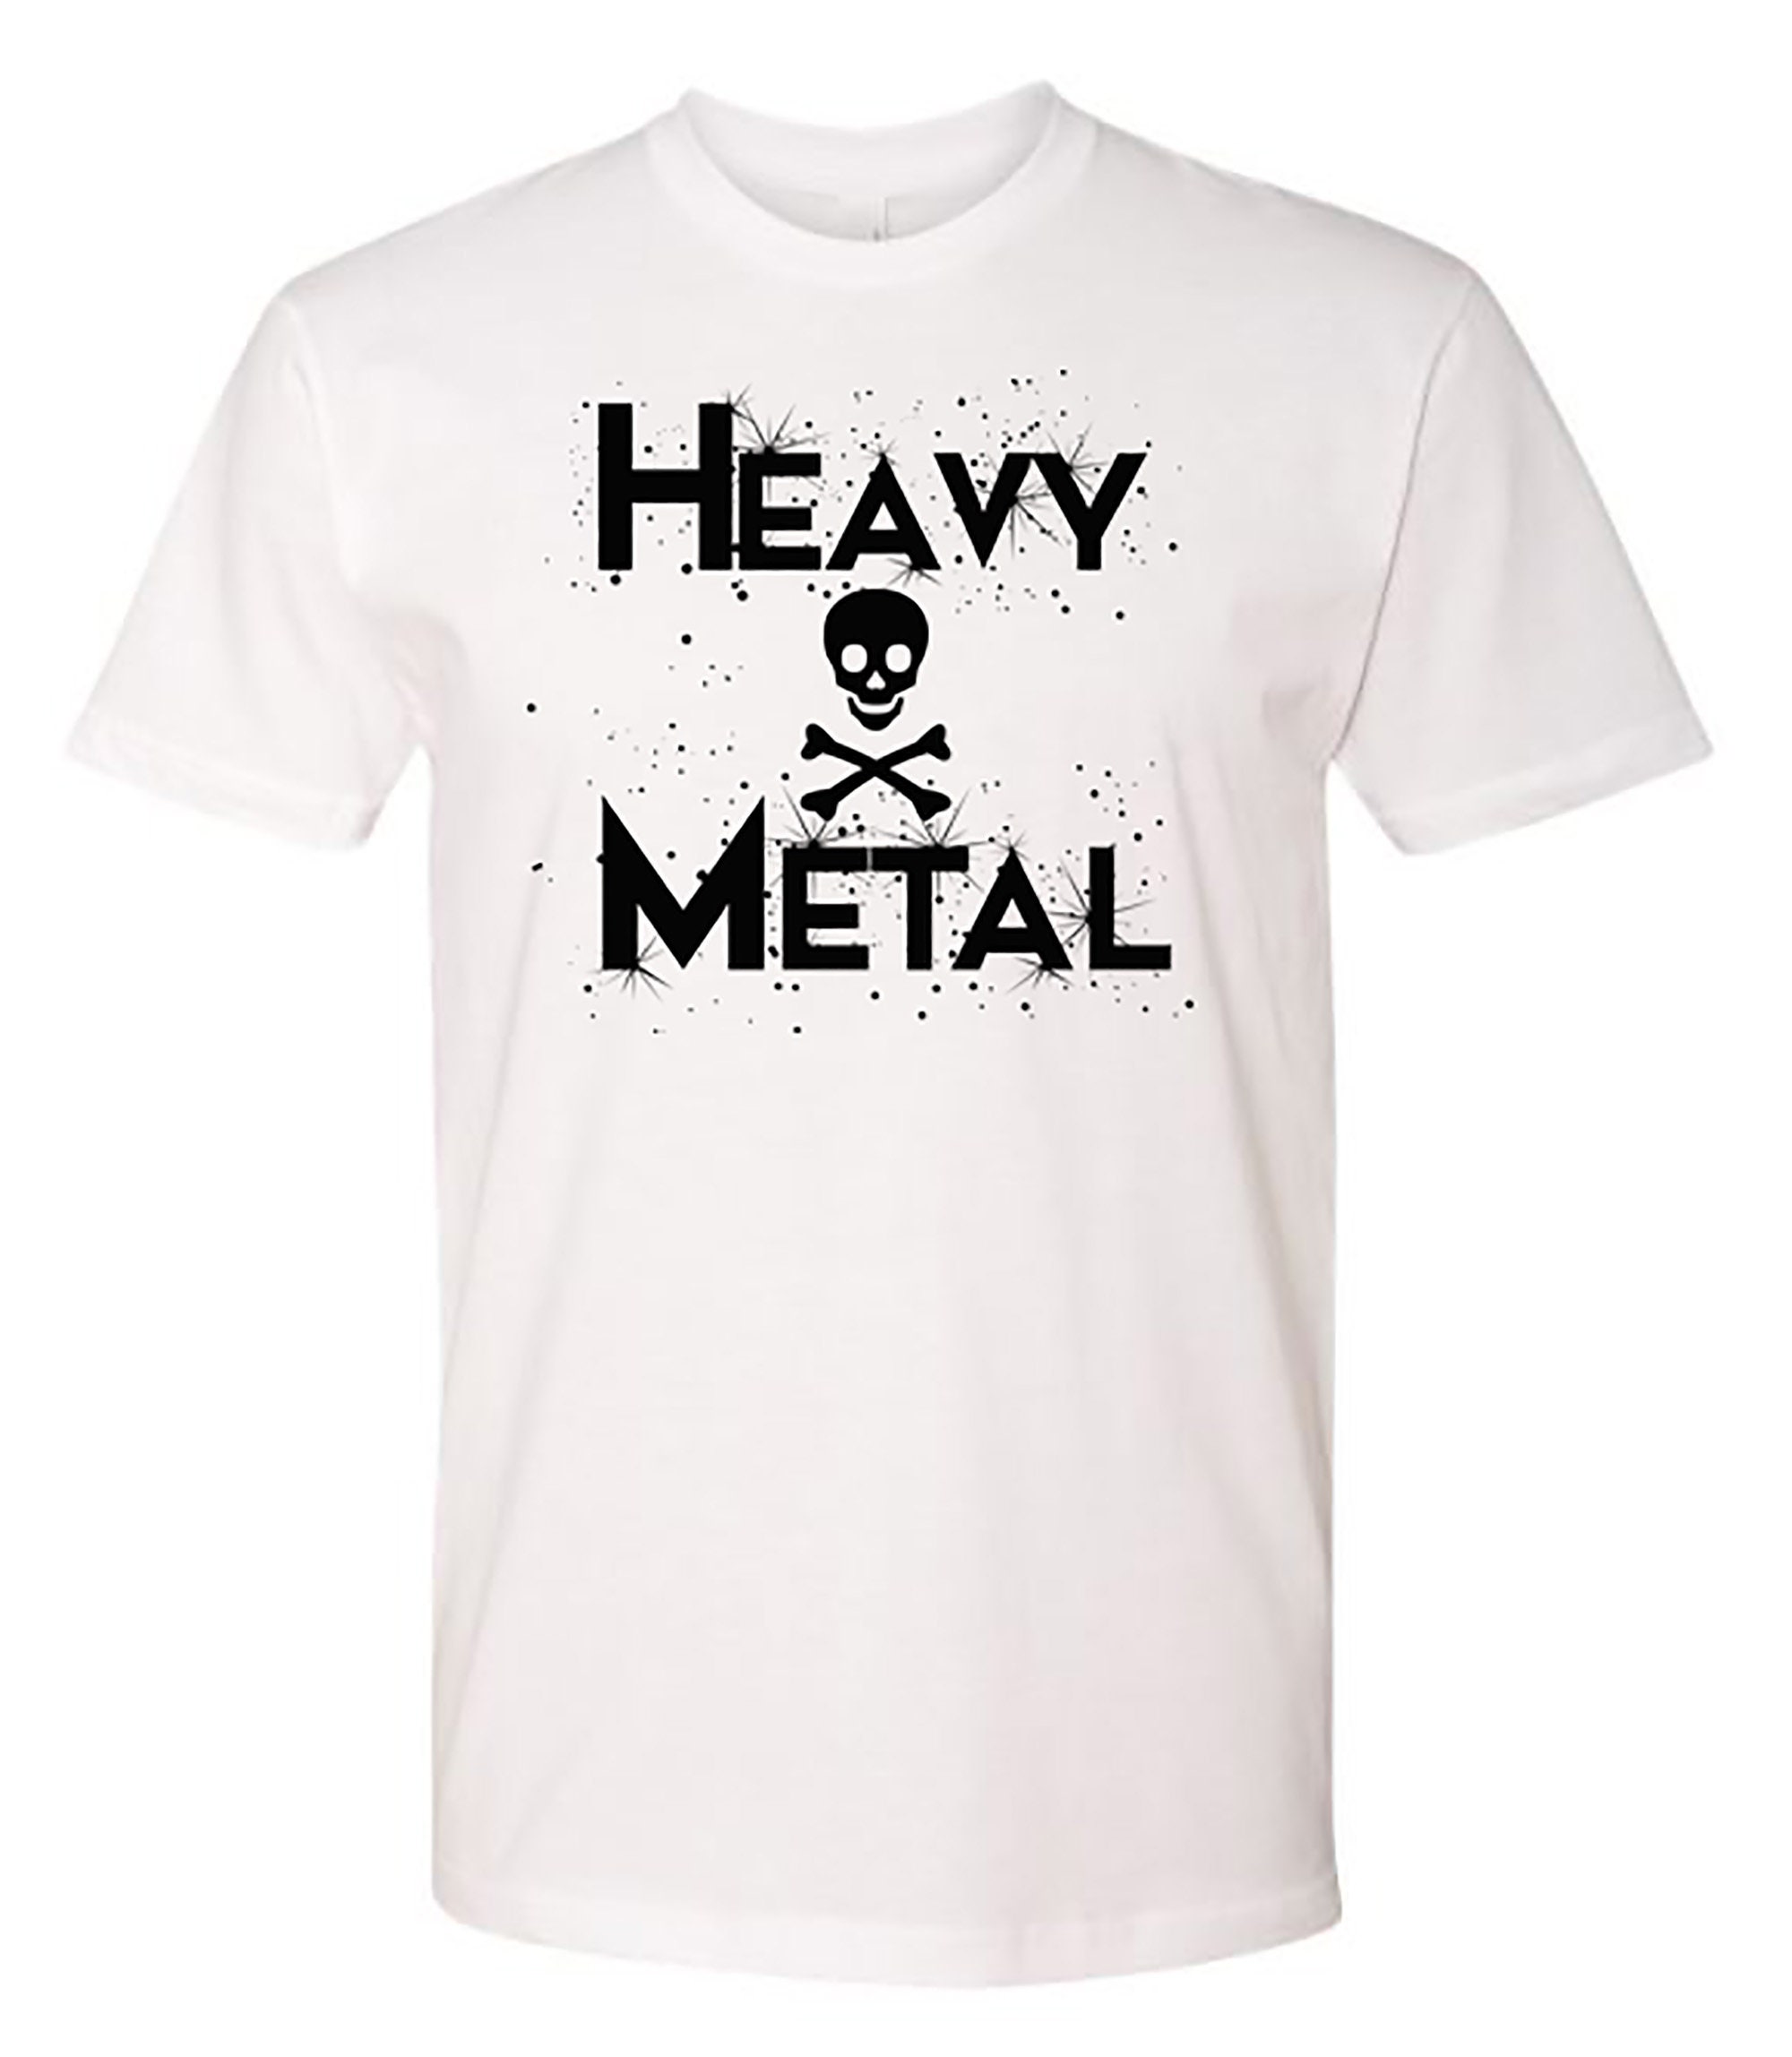 Heavy Metal Tees Collection | Etsy